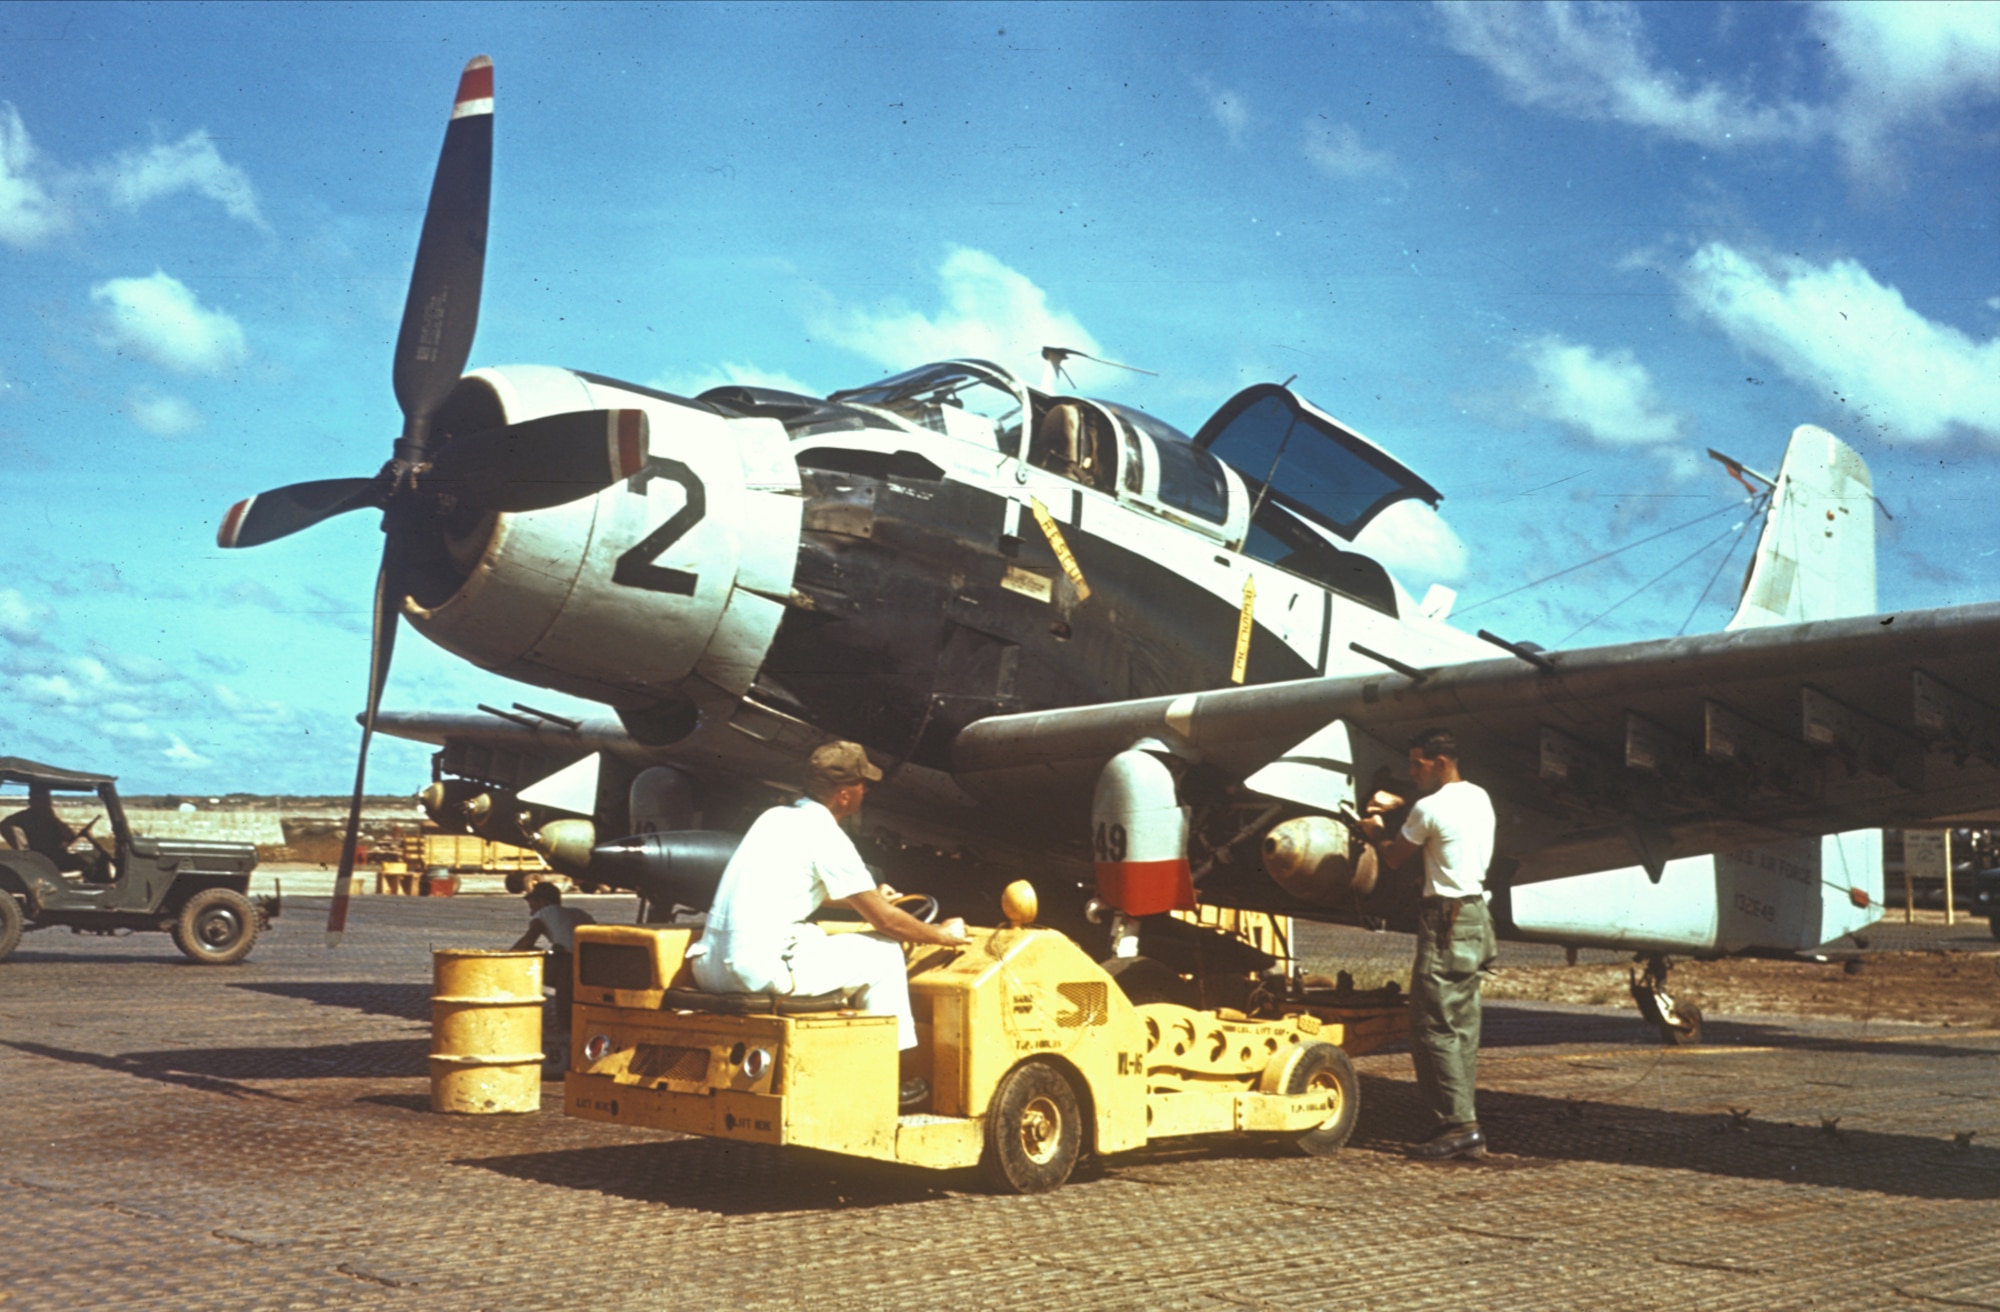 At first, the U.S. Air Force sent propeller-driven attack aircraft to aid South Vietnam. (U.S. Air Force photo).